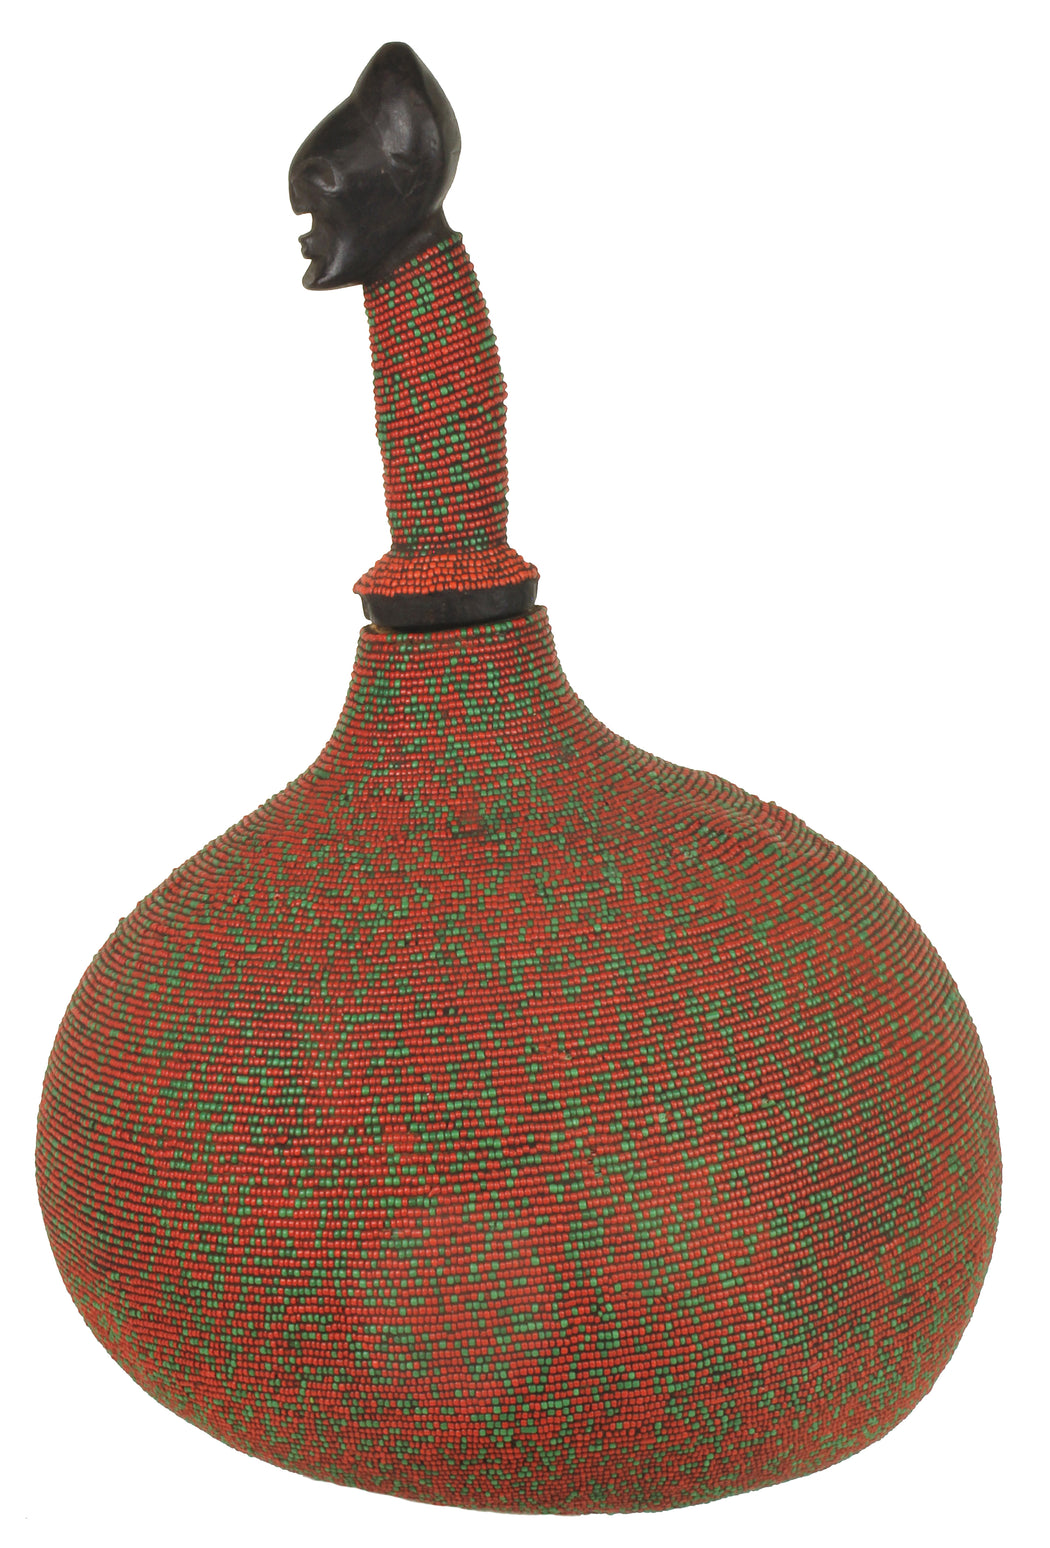 Beaded Decor Gourd from Congo, Africa - Red/Green - Niger Bend